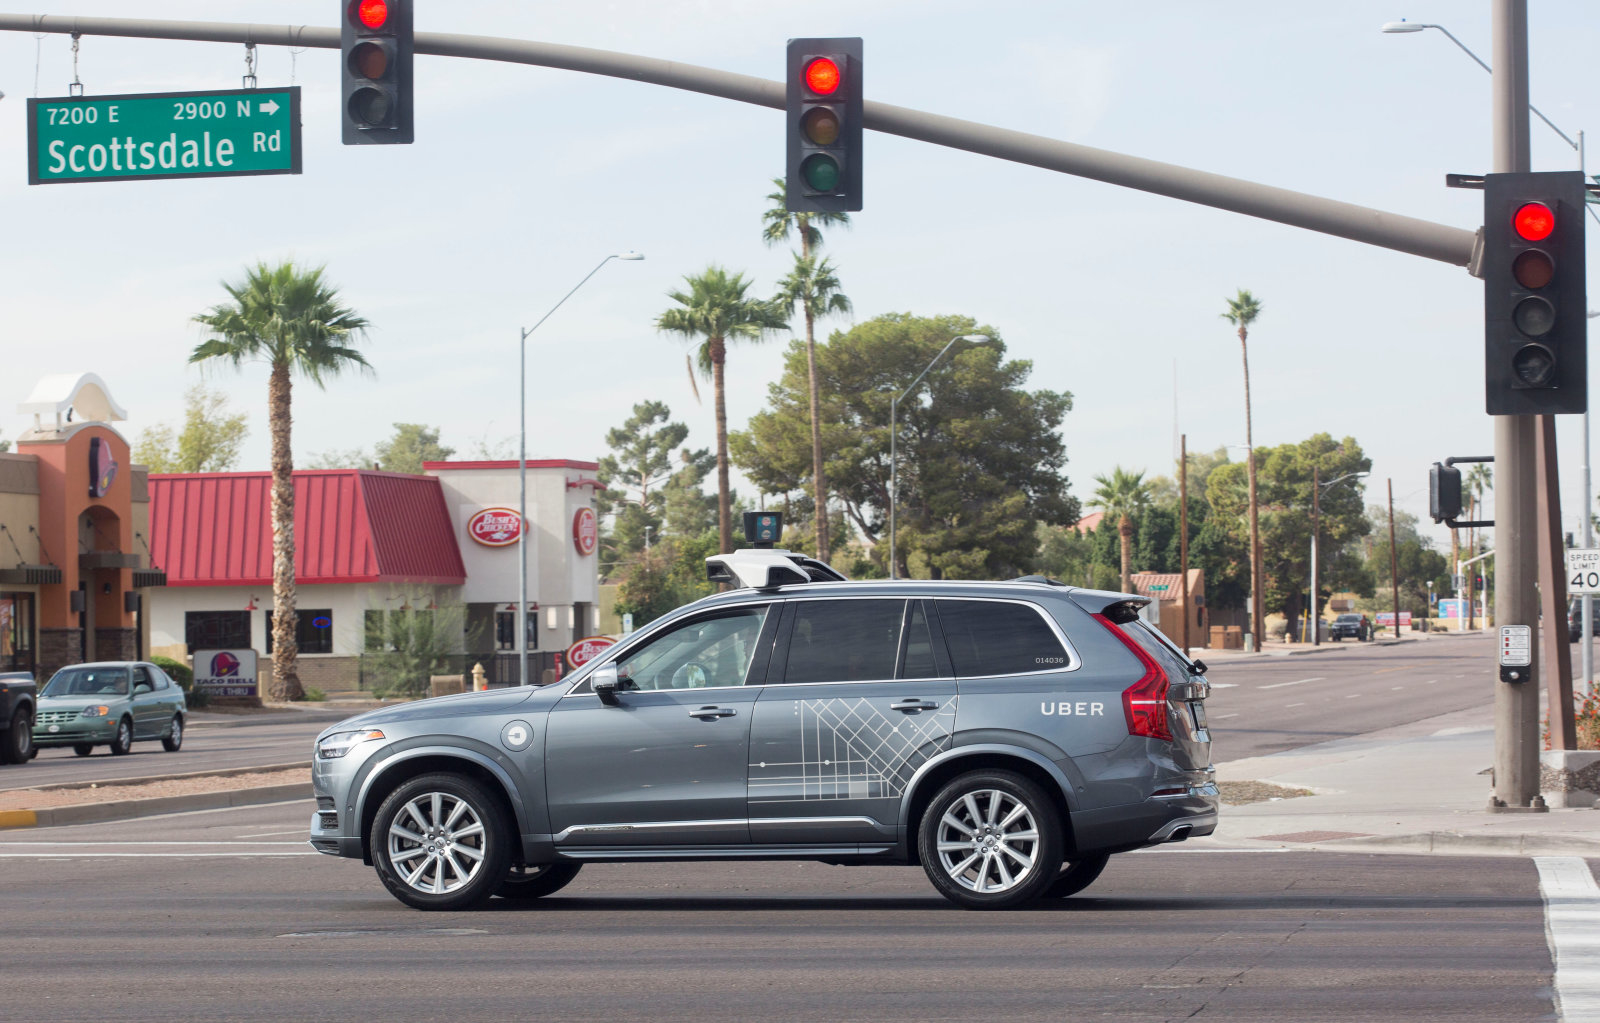 A self driving Volvo vehicle, purchased by Uber, moves through an intersection in Scottsdale, Arizona, U.S., December 1, 2017.  Photo taken on December 1, 2017.  REUTERS/Natalie Behring